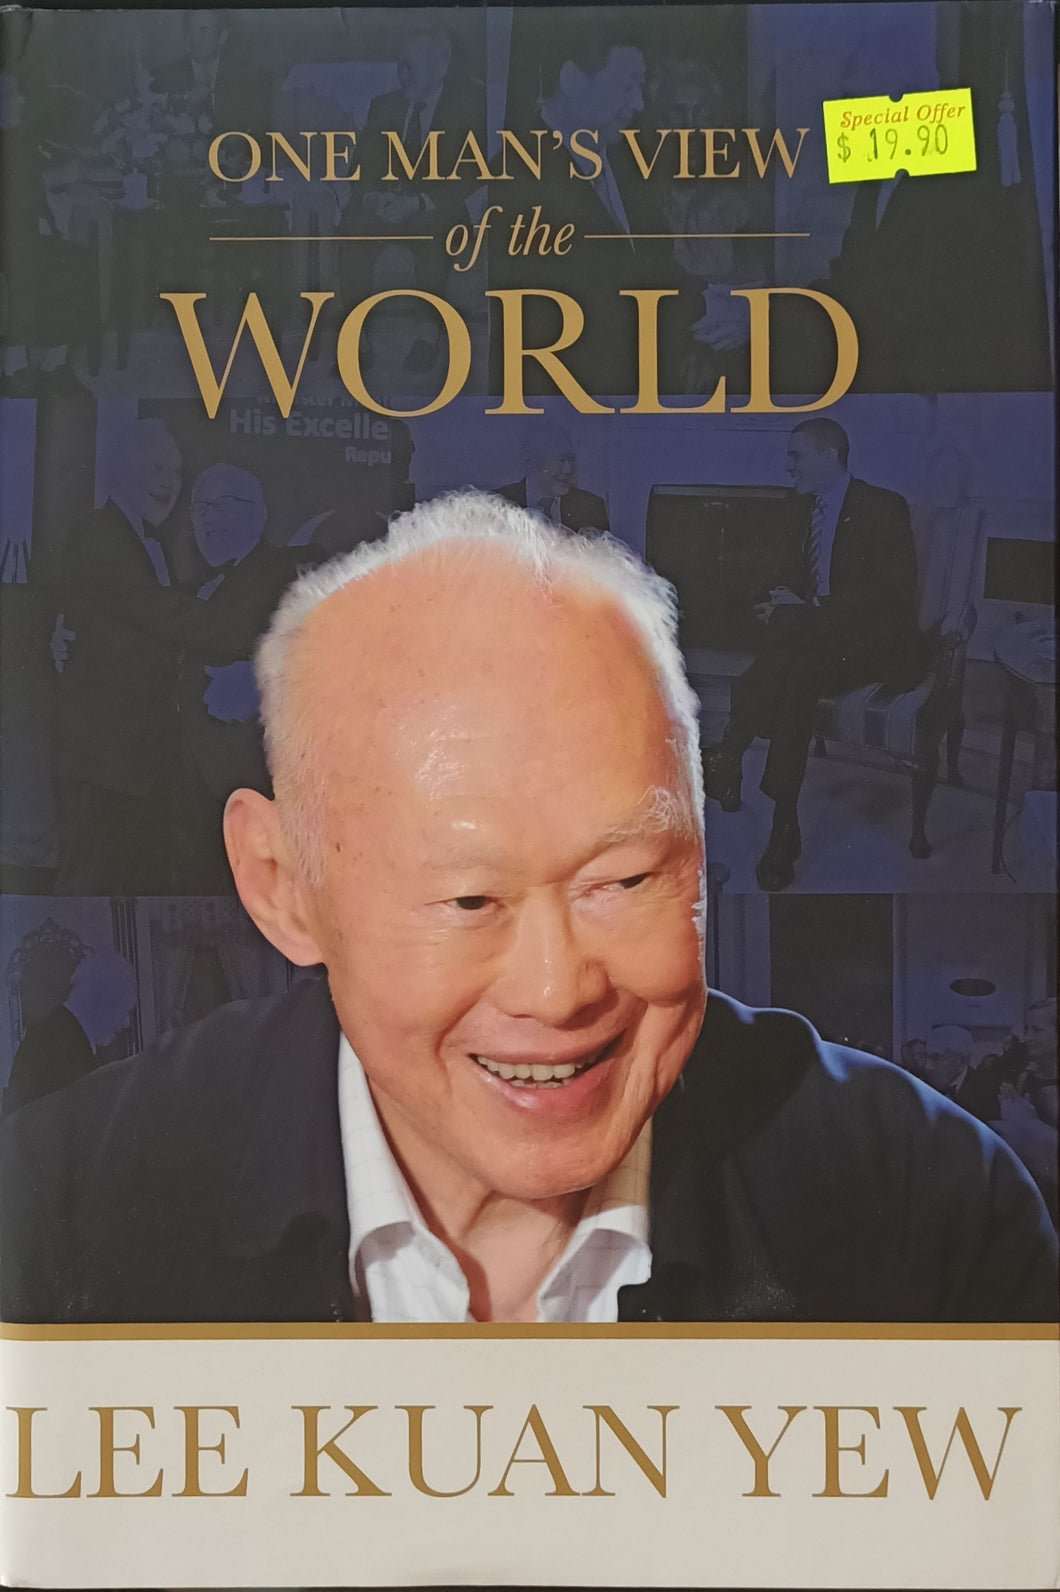 One Man's View of the World - Lee Kuan Yew